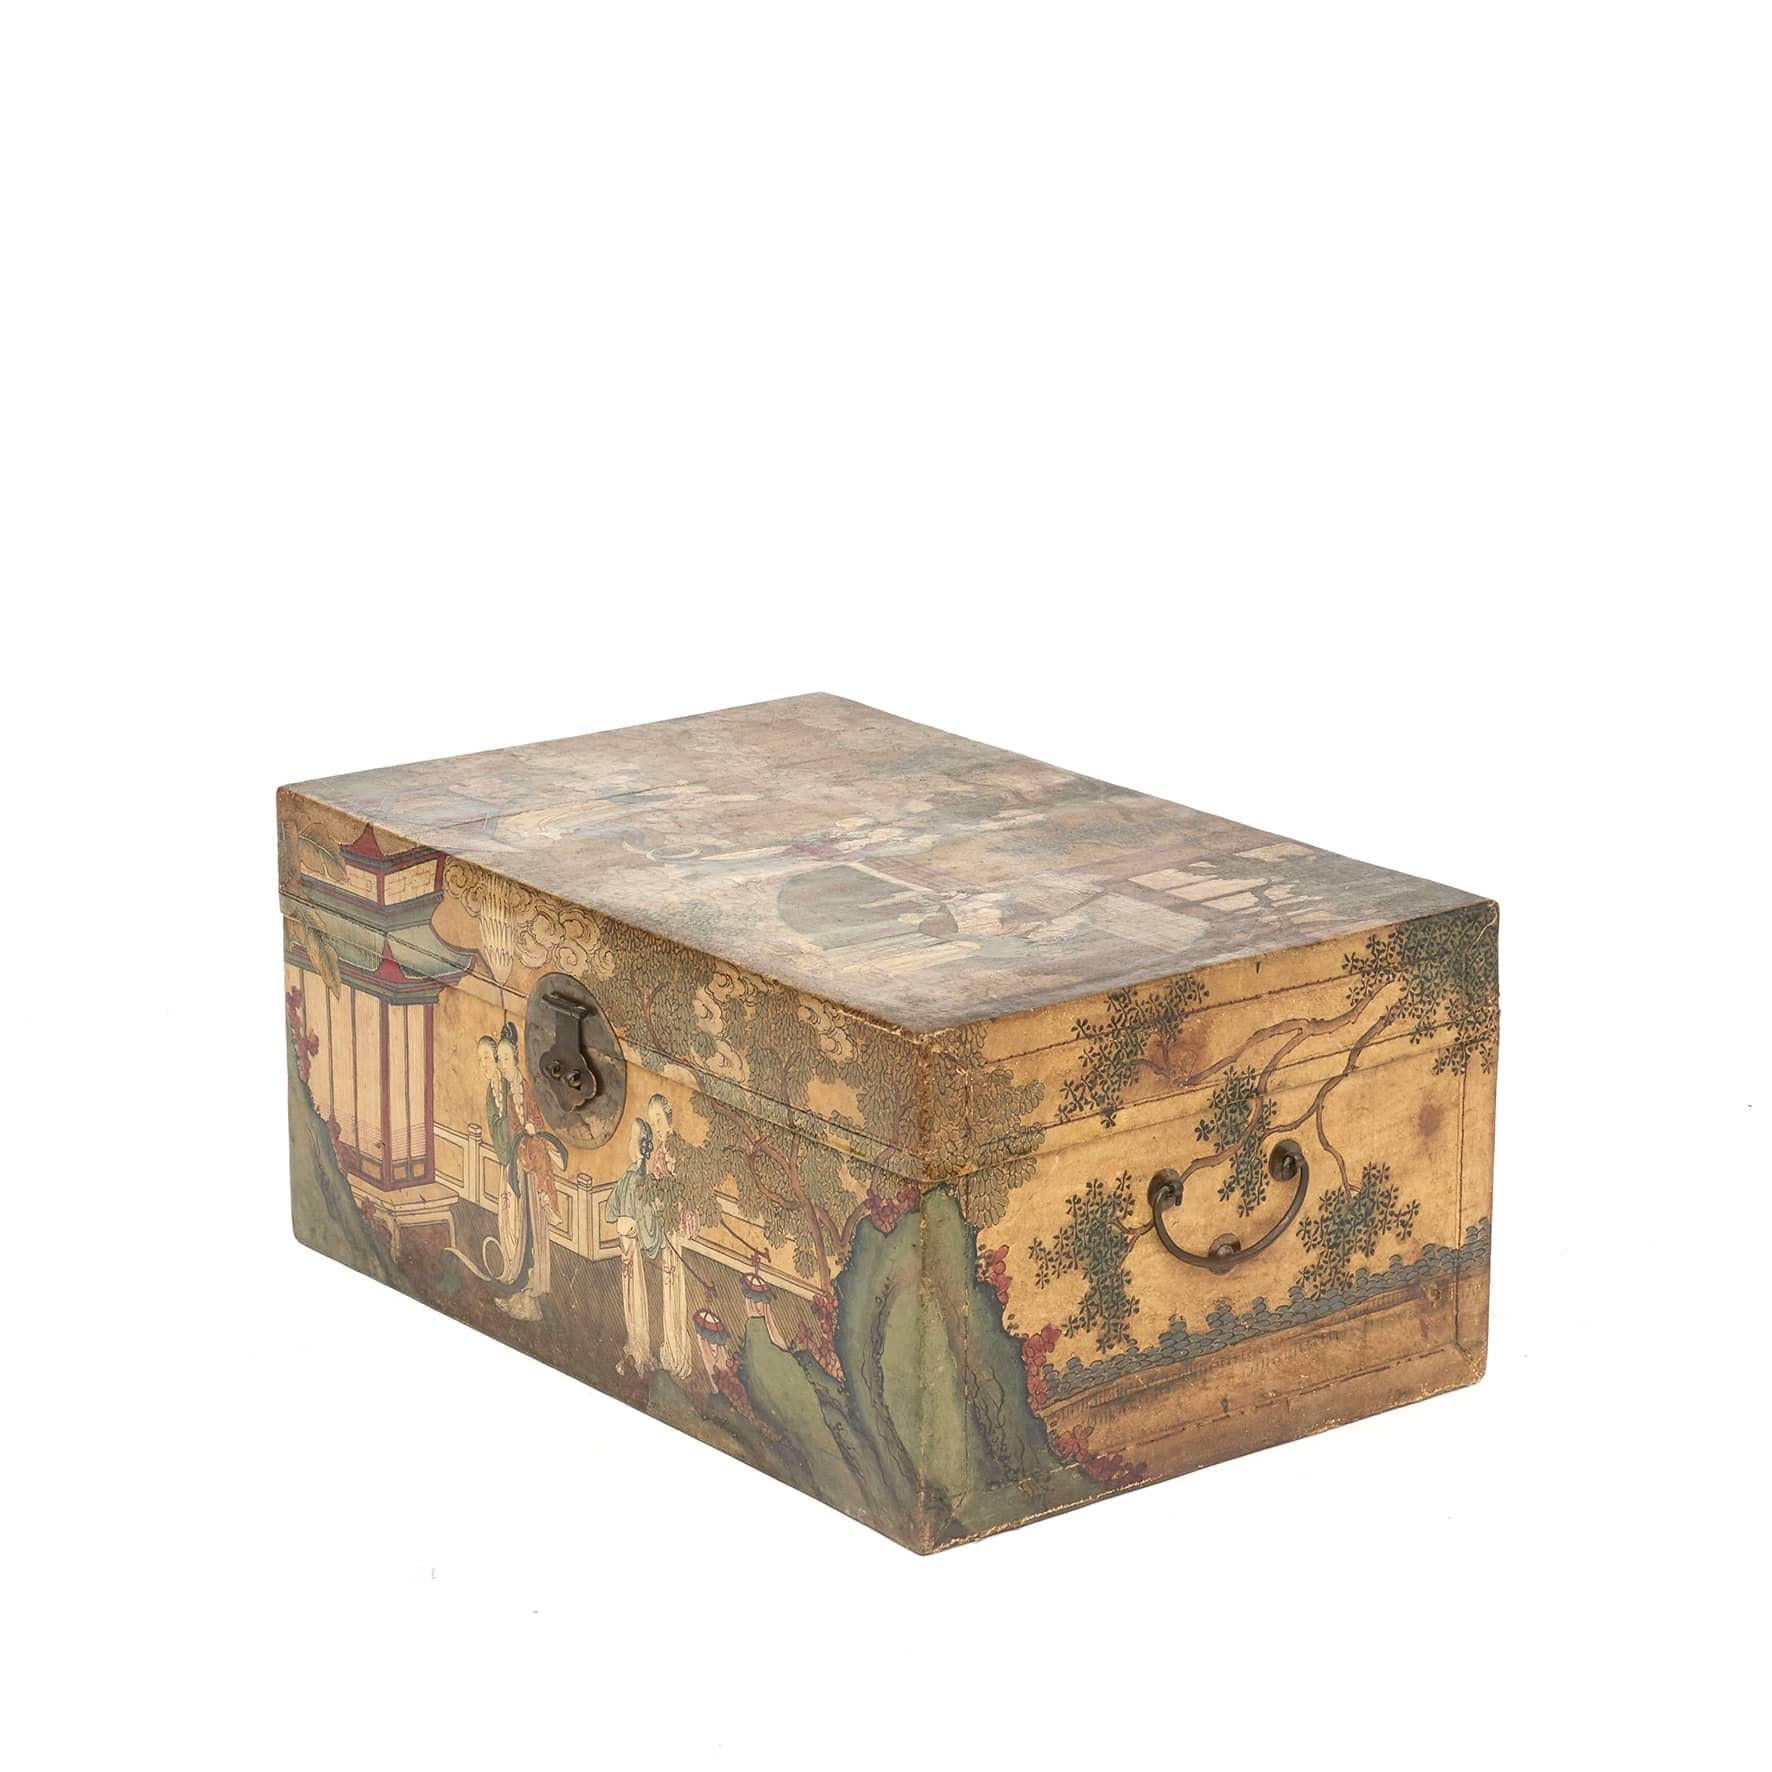 Rare antique 'one of a kind' storage trunk.

Camphor wood lined with leather hand painted on all four sides in classic chinoiserie scenes of women, trees, pavilions etc.
Trunks and storage chests were the most ubiquitous form of household storage